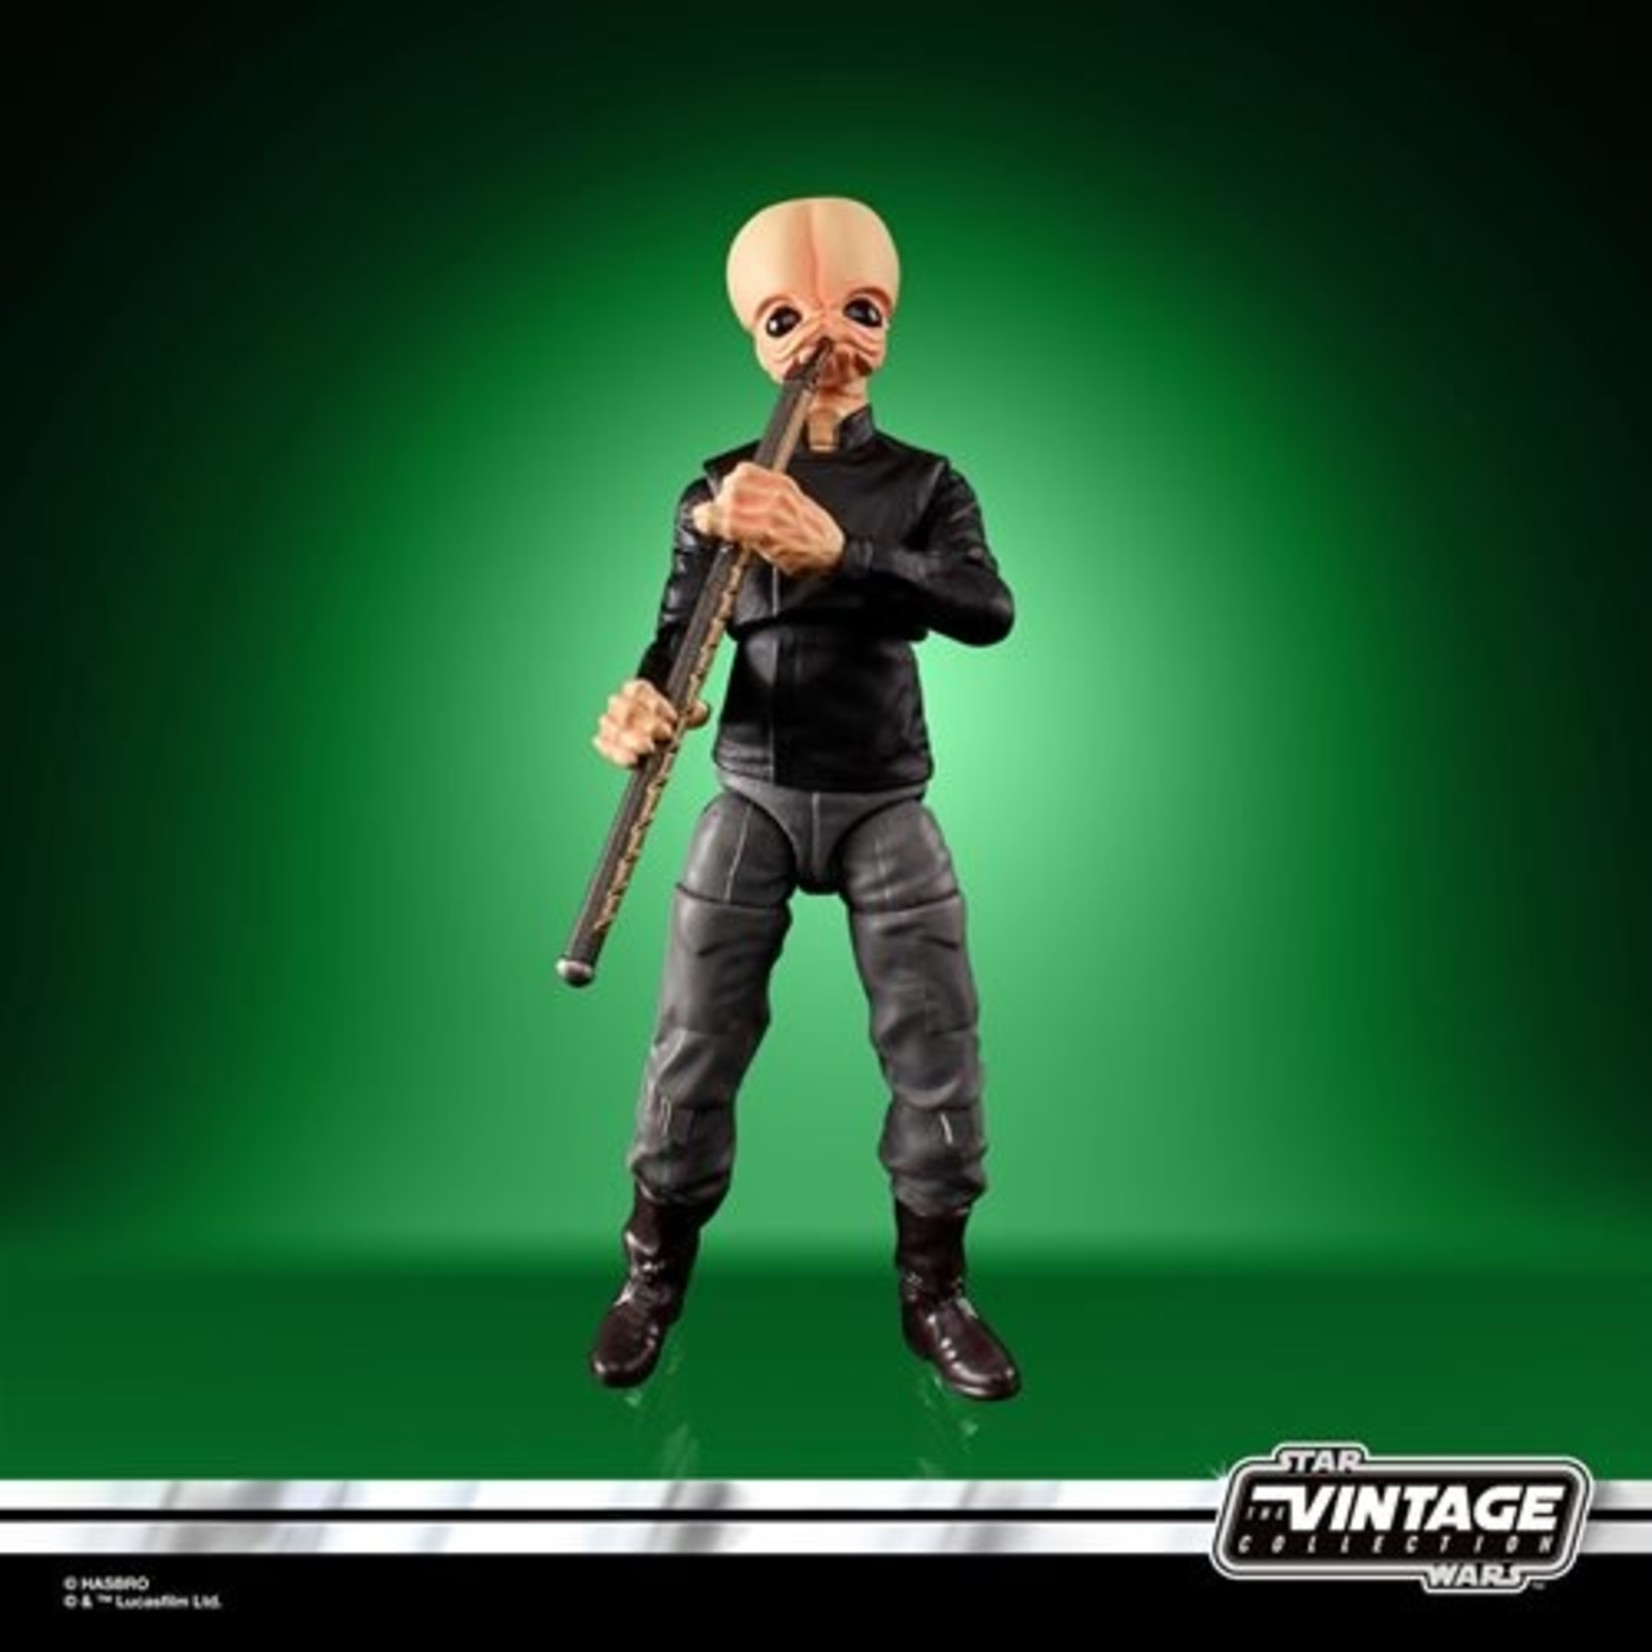 Hasbro Hasbro Star Wars The Vintage Collection Figrin D'an 3.75 inch Figure